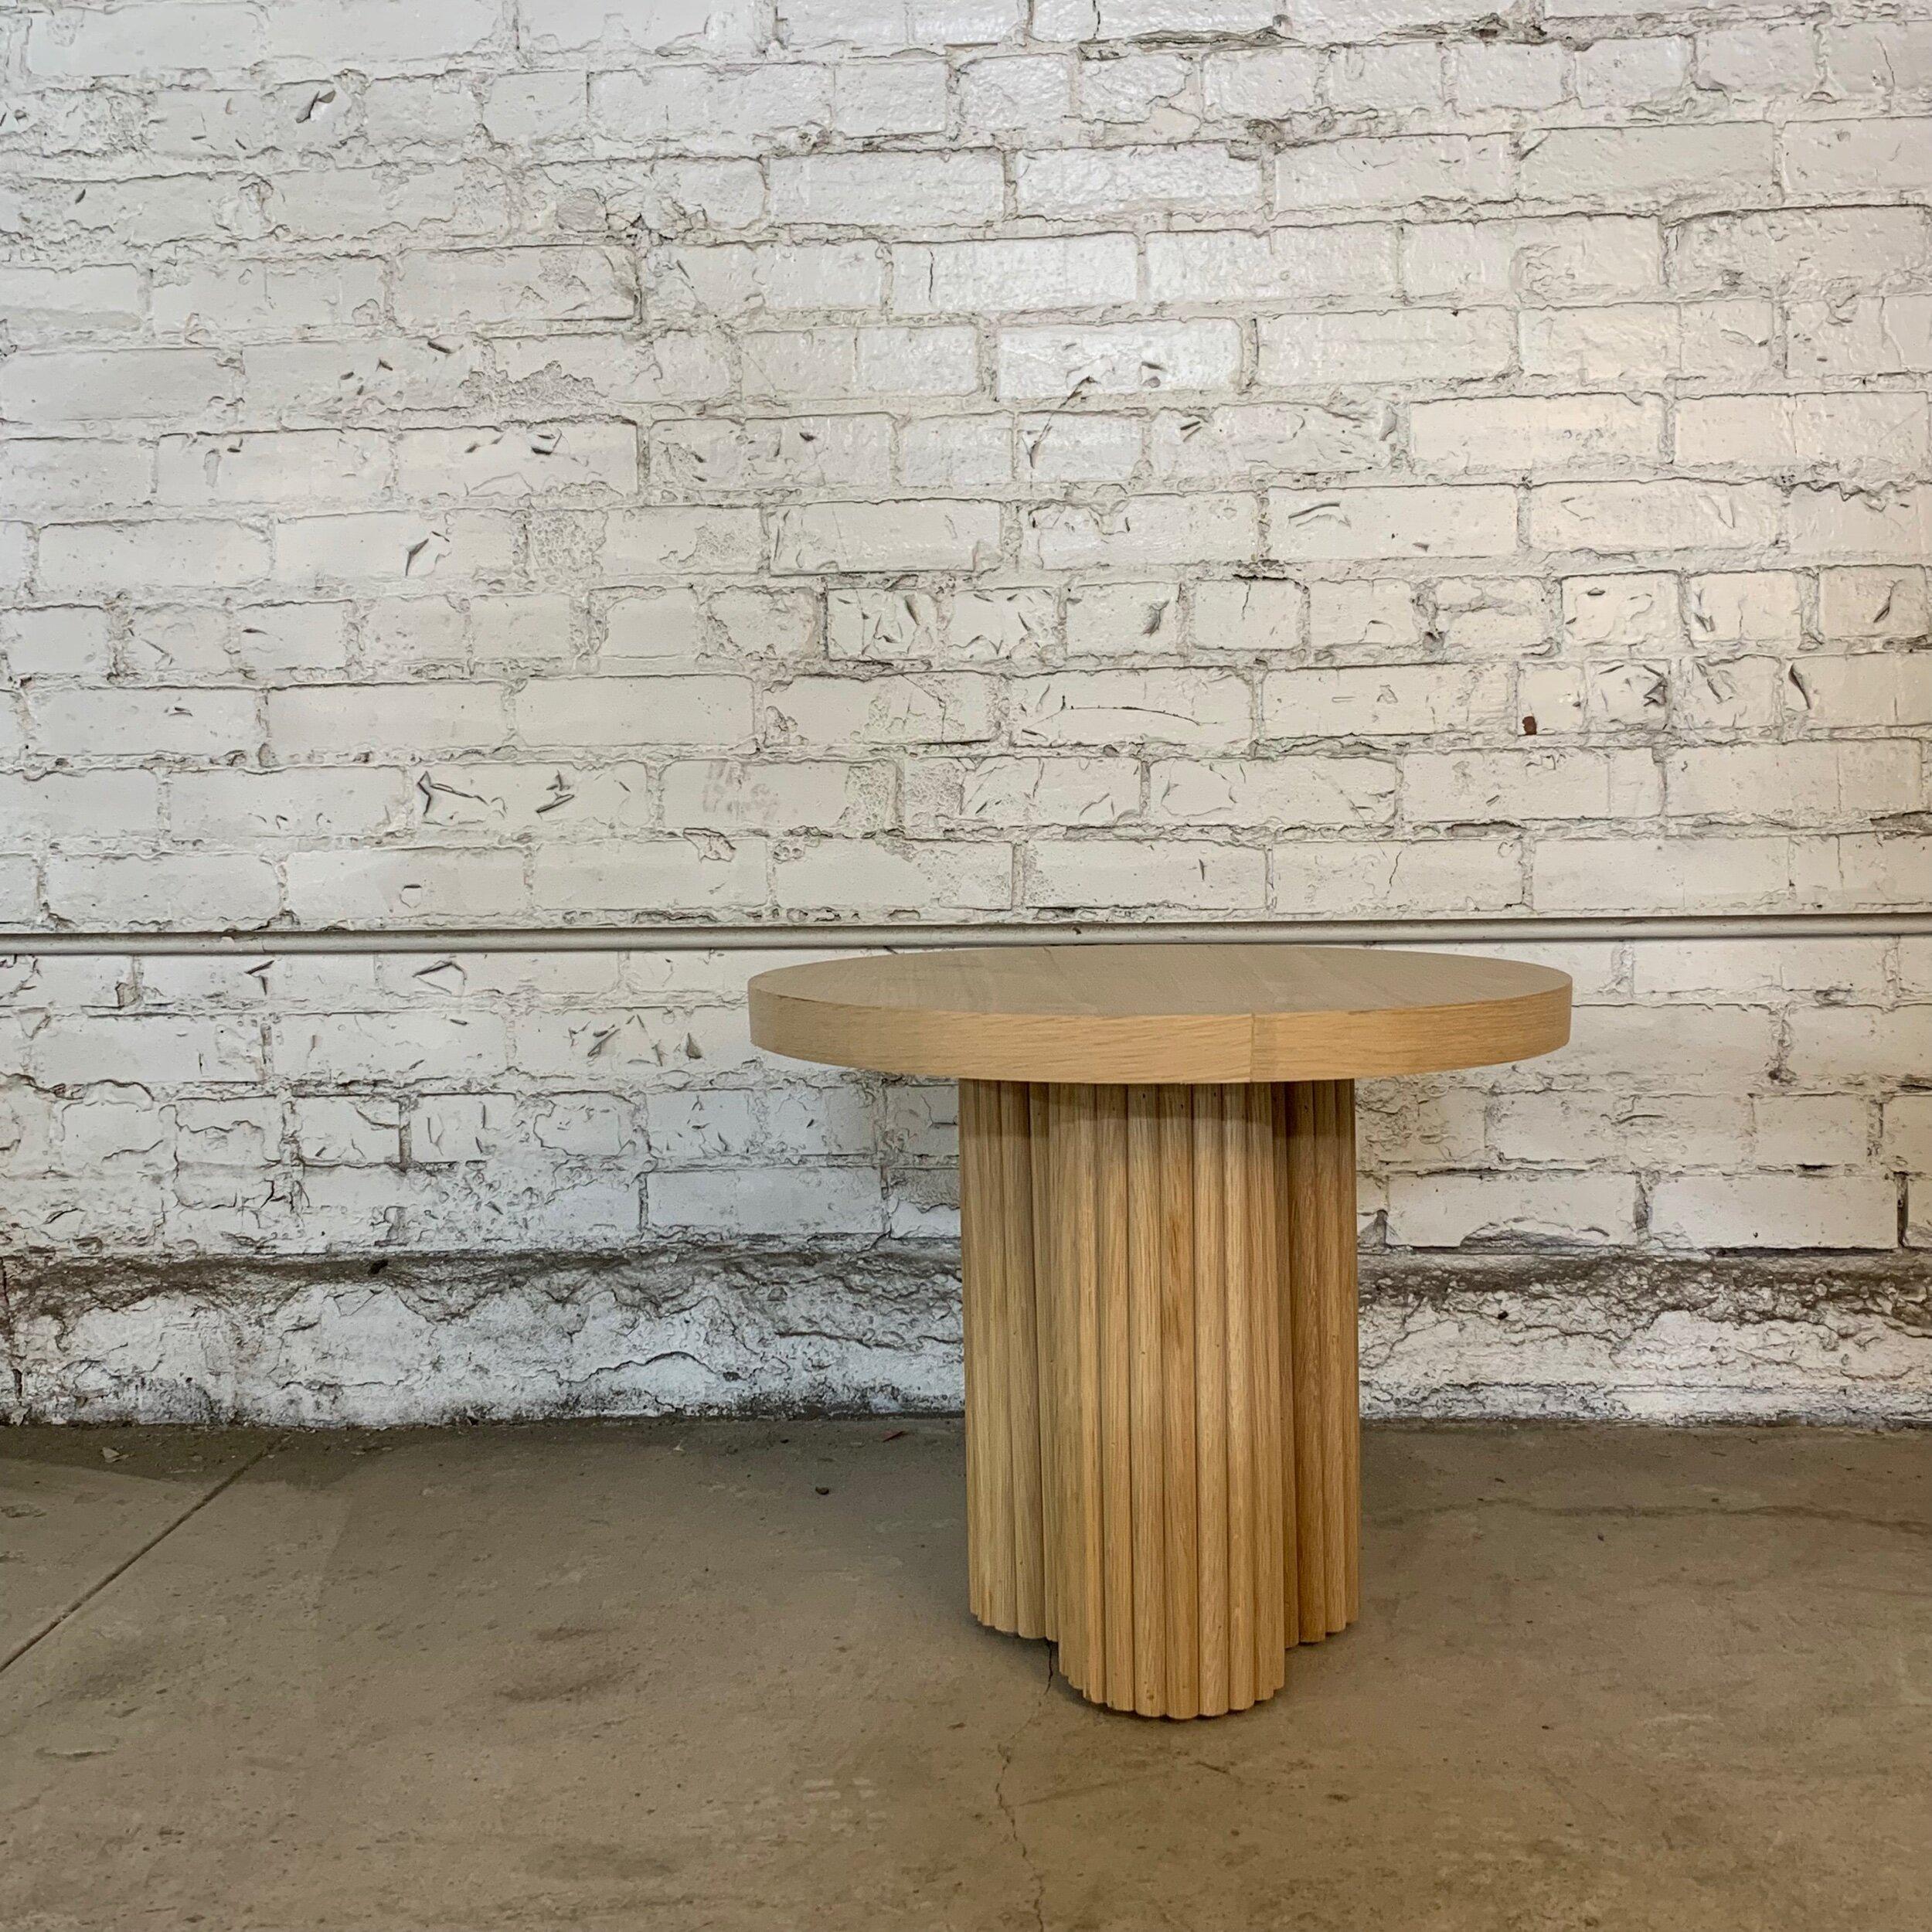 Handmade to order. Has four clear coats of flat sealer. For a custom matched color please provide a sample, surcharge is 150.
Lead time 1.5 - 3 months
Materials Used - solid oak and white oak and wooden back VENEER.